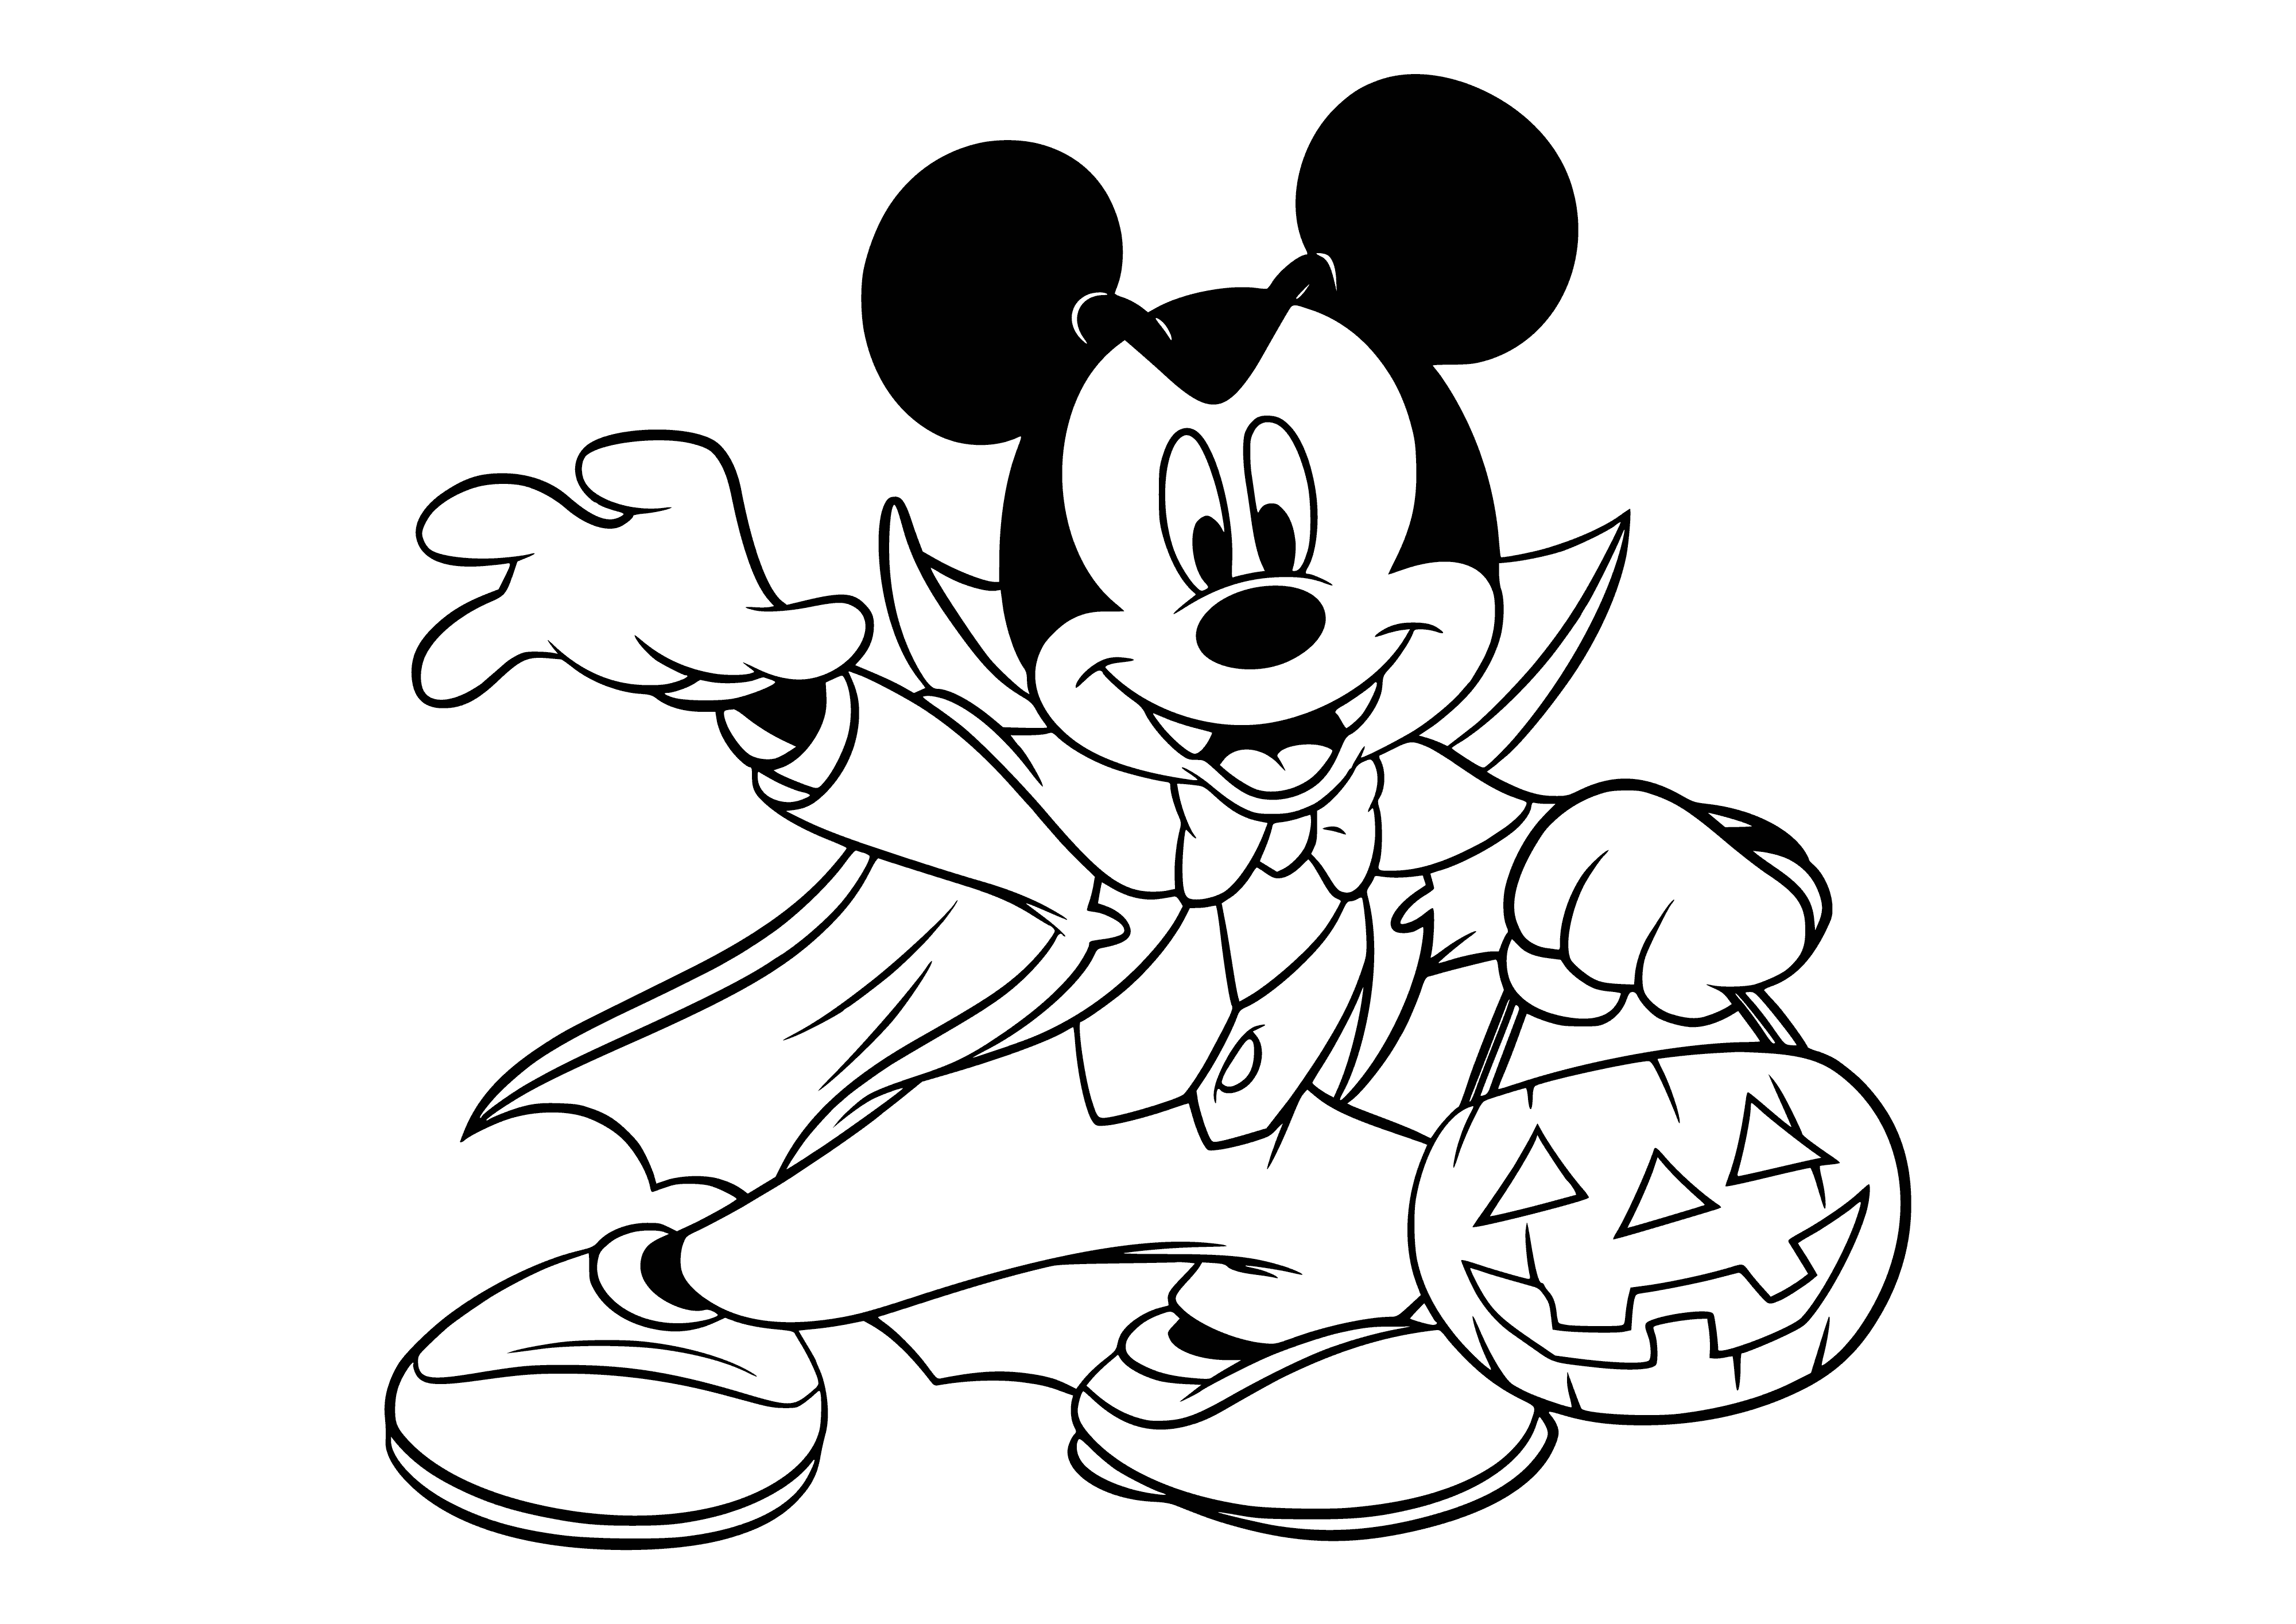 Mickey Mouse on Hellowine coloring page